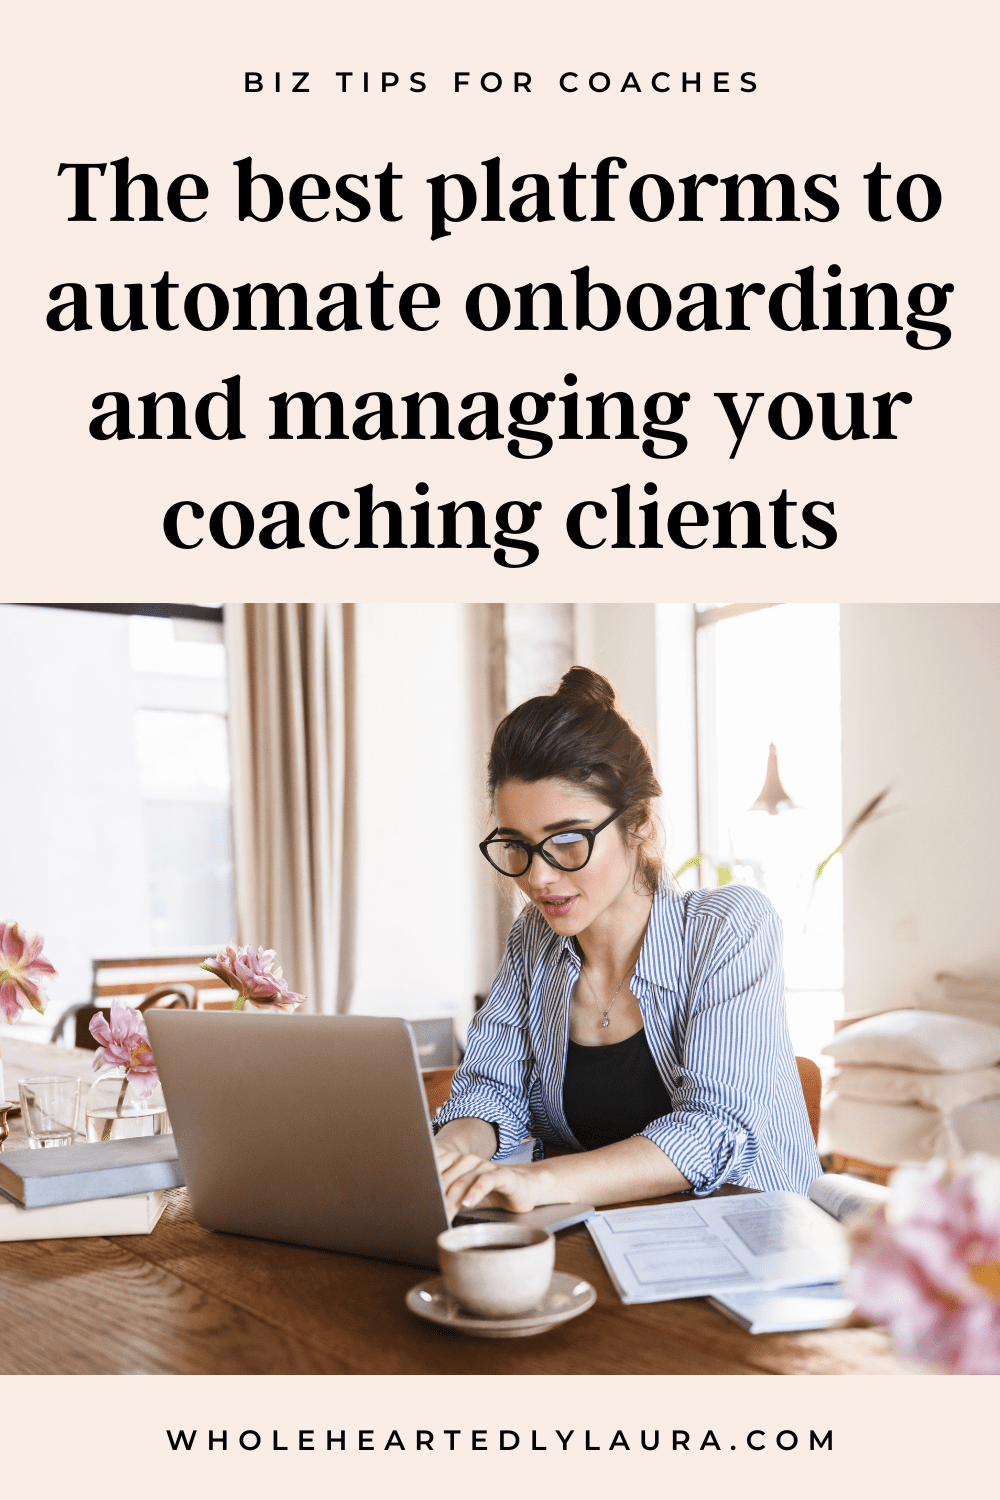 How to onboard a client